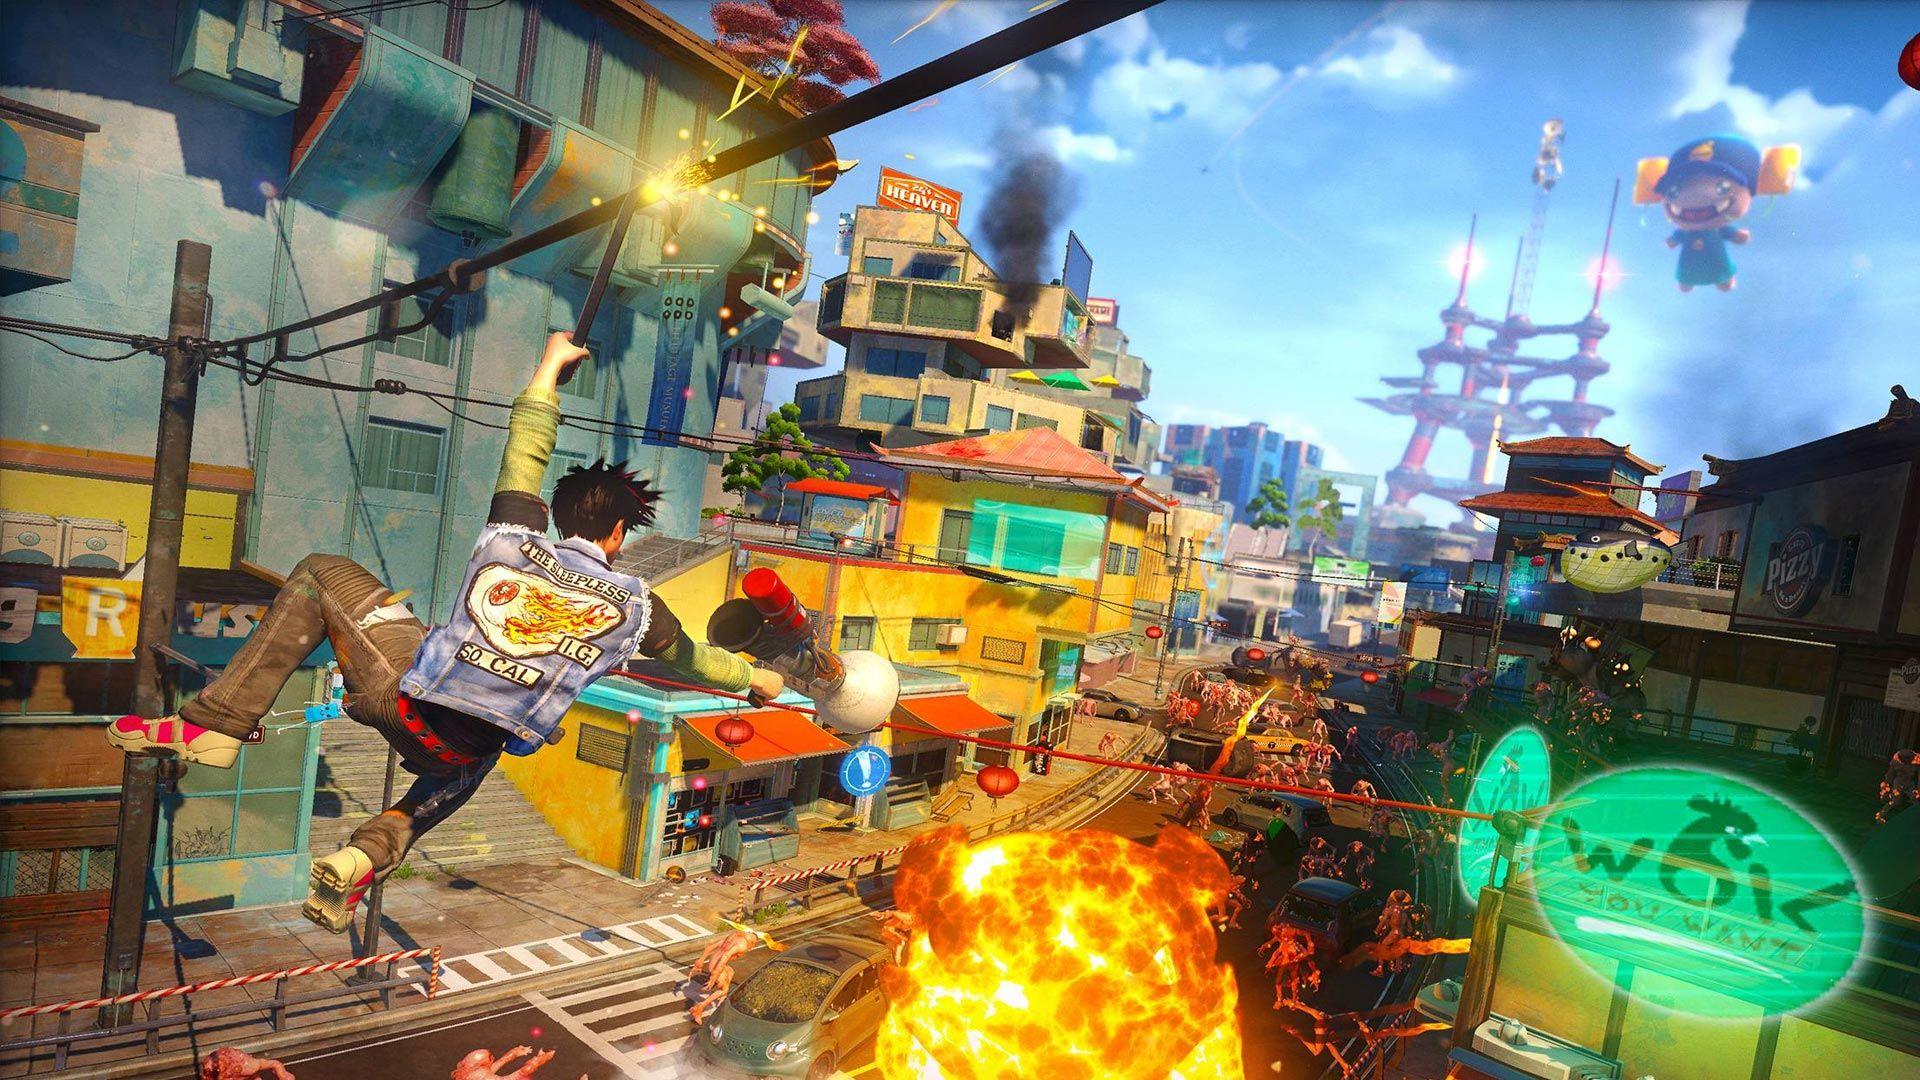 Sunset Overdrive Wallpapers